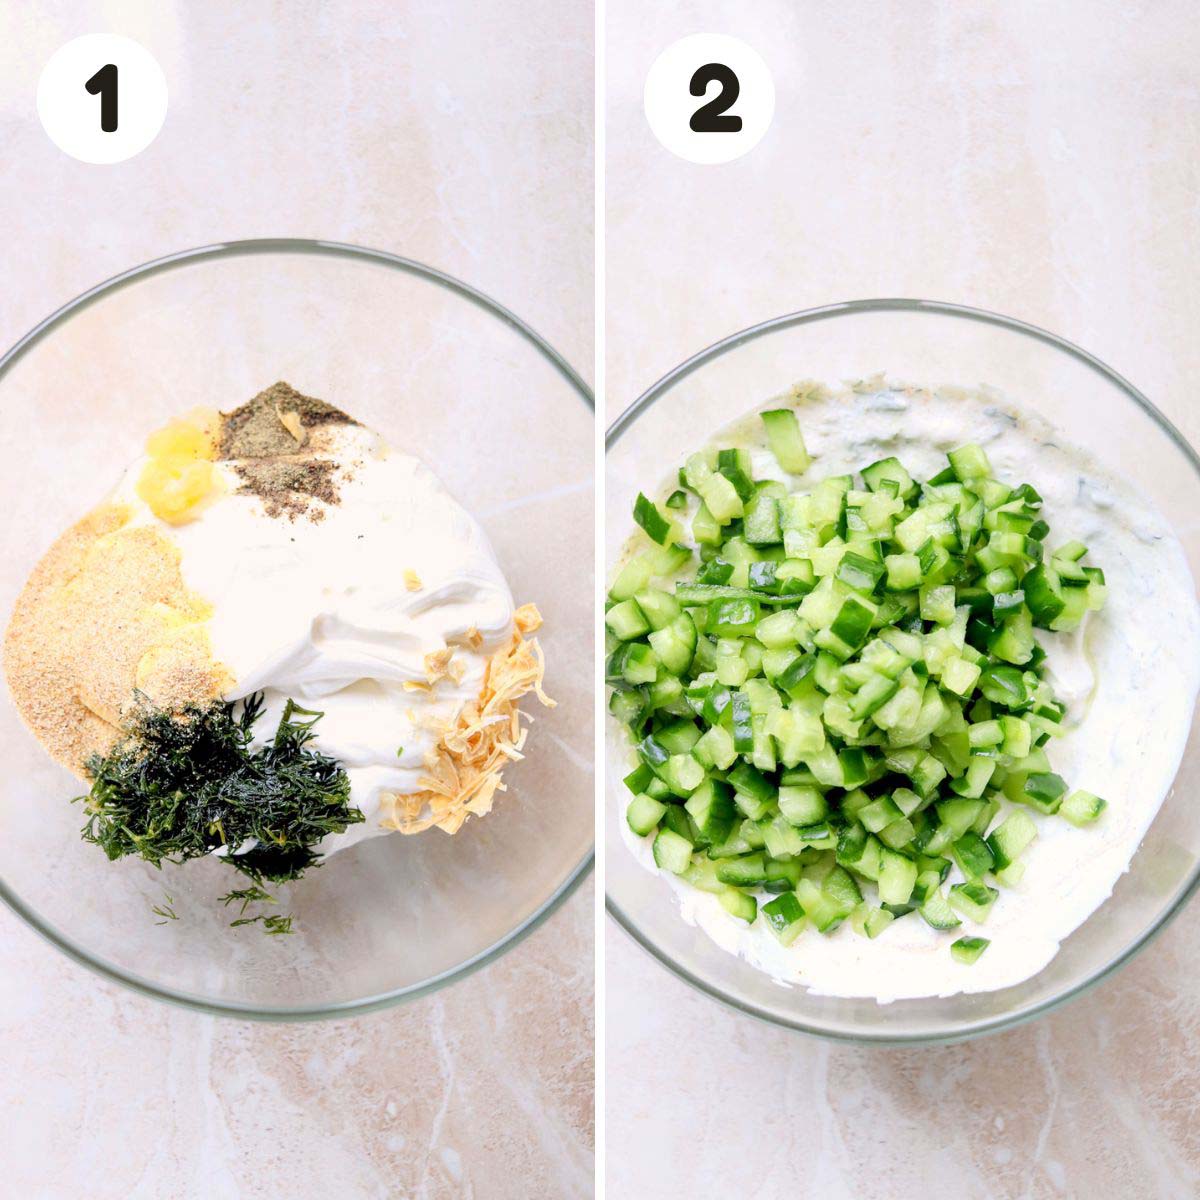 Steps to make the dill dip.